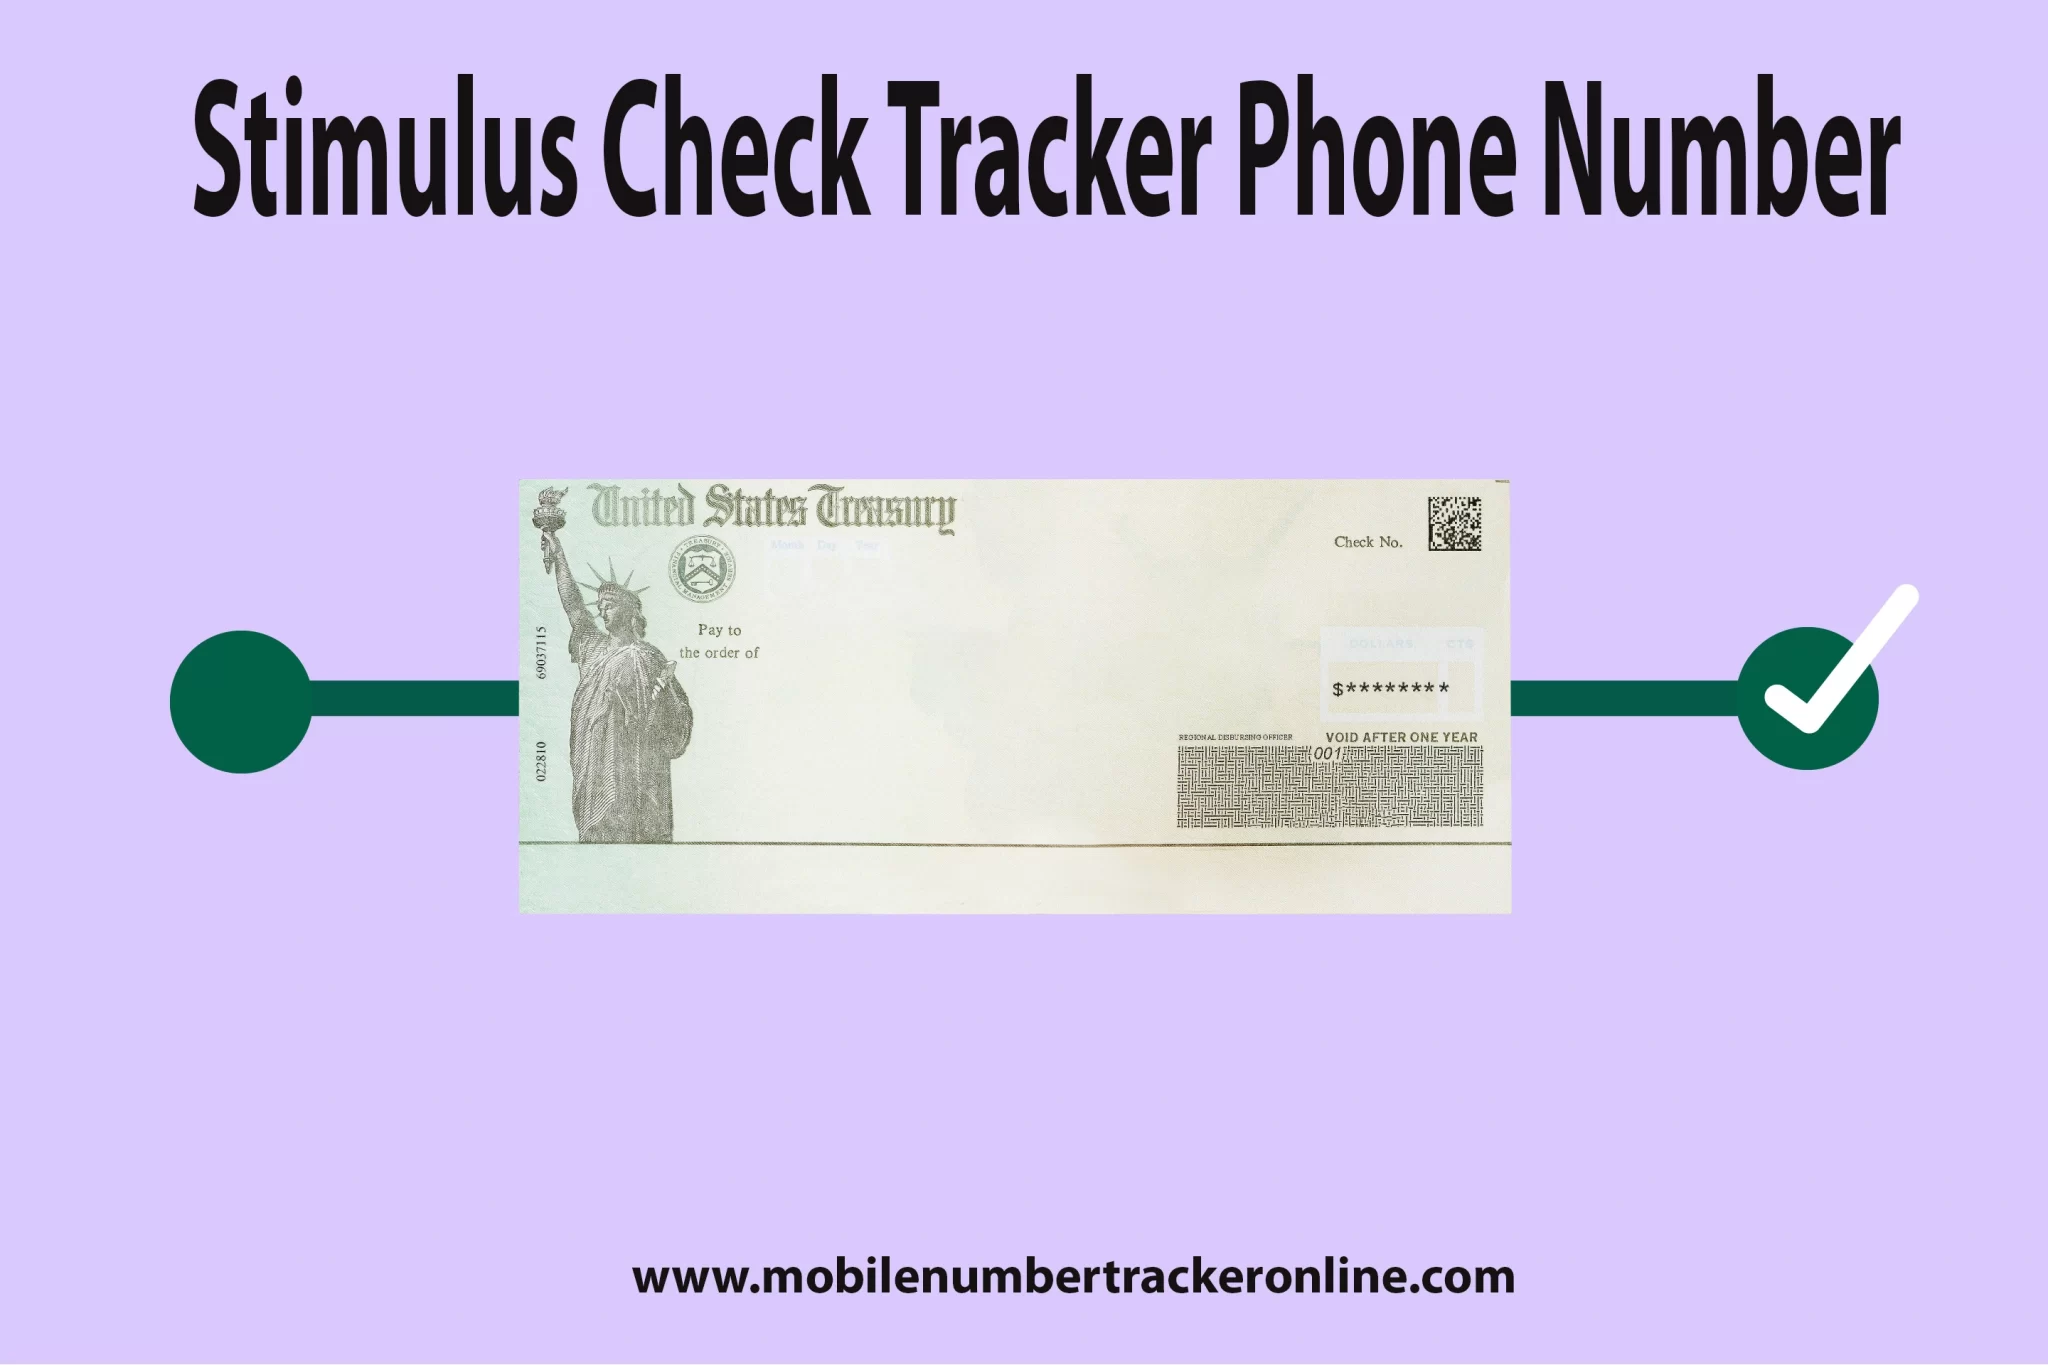 Stimulus Check Tracker Phone Number